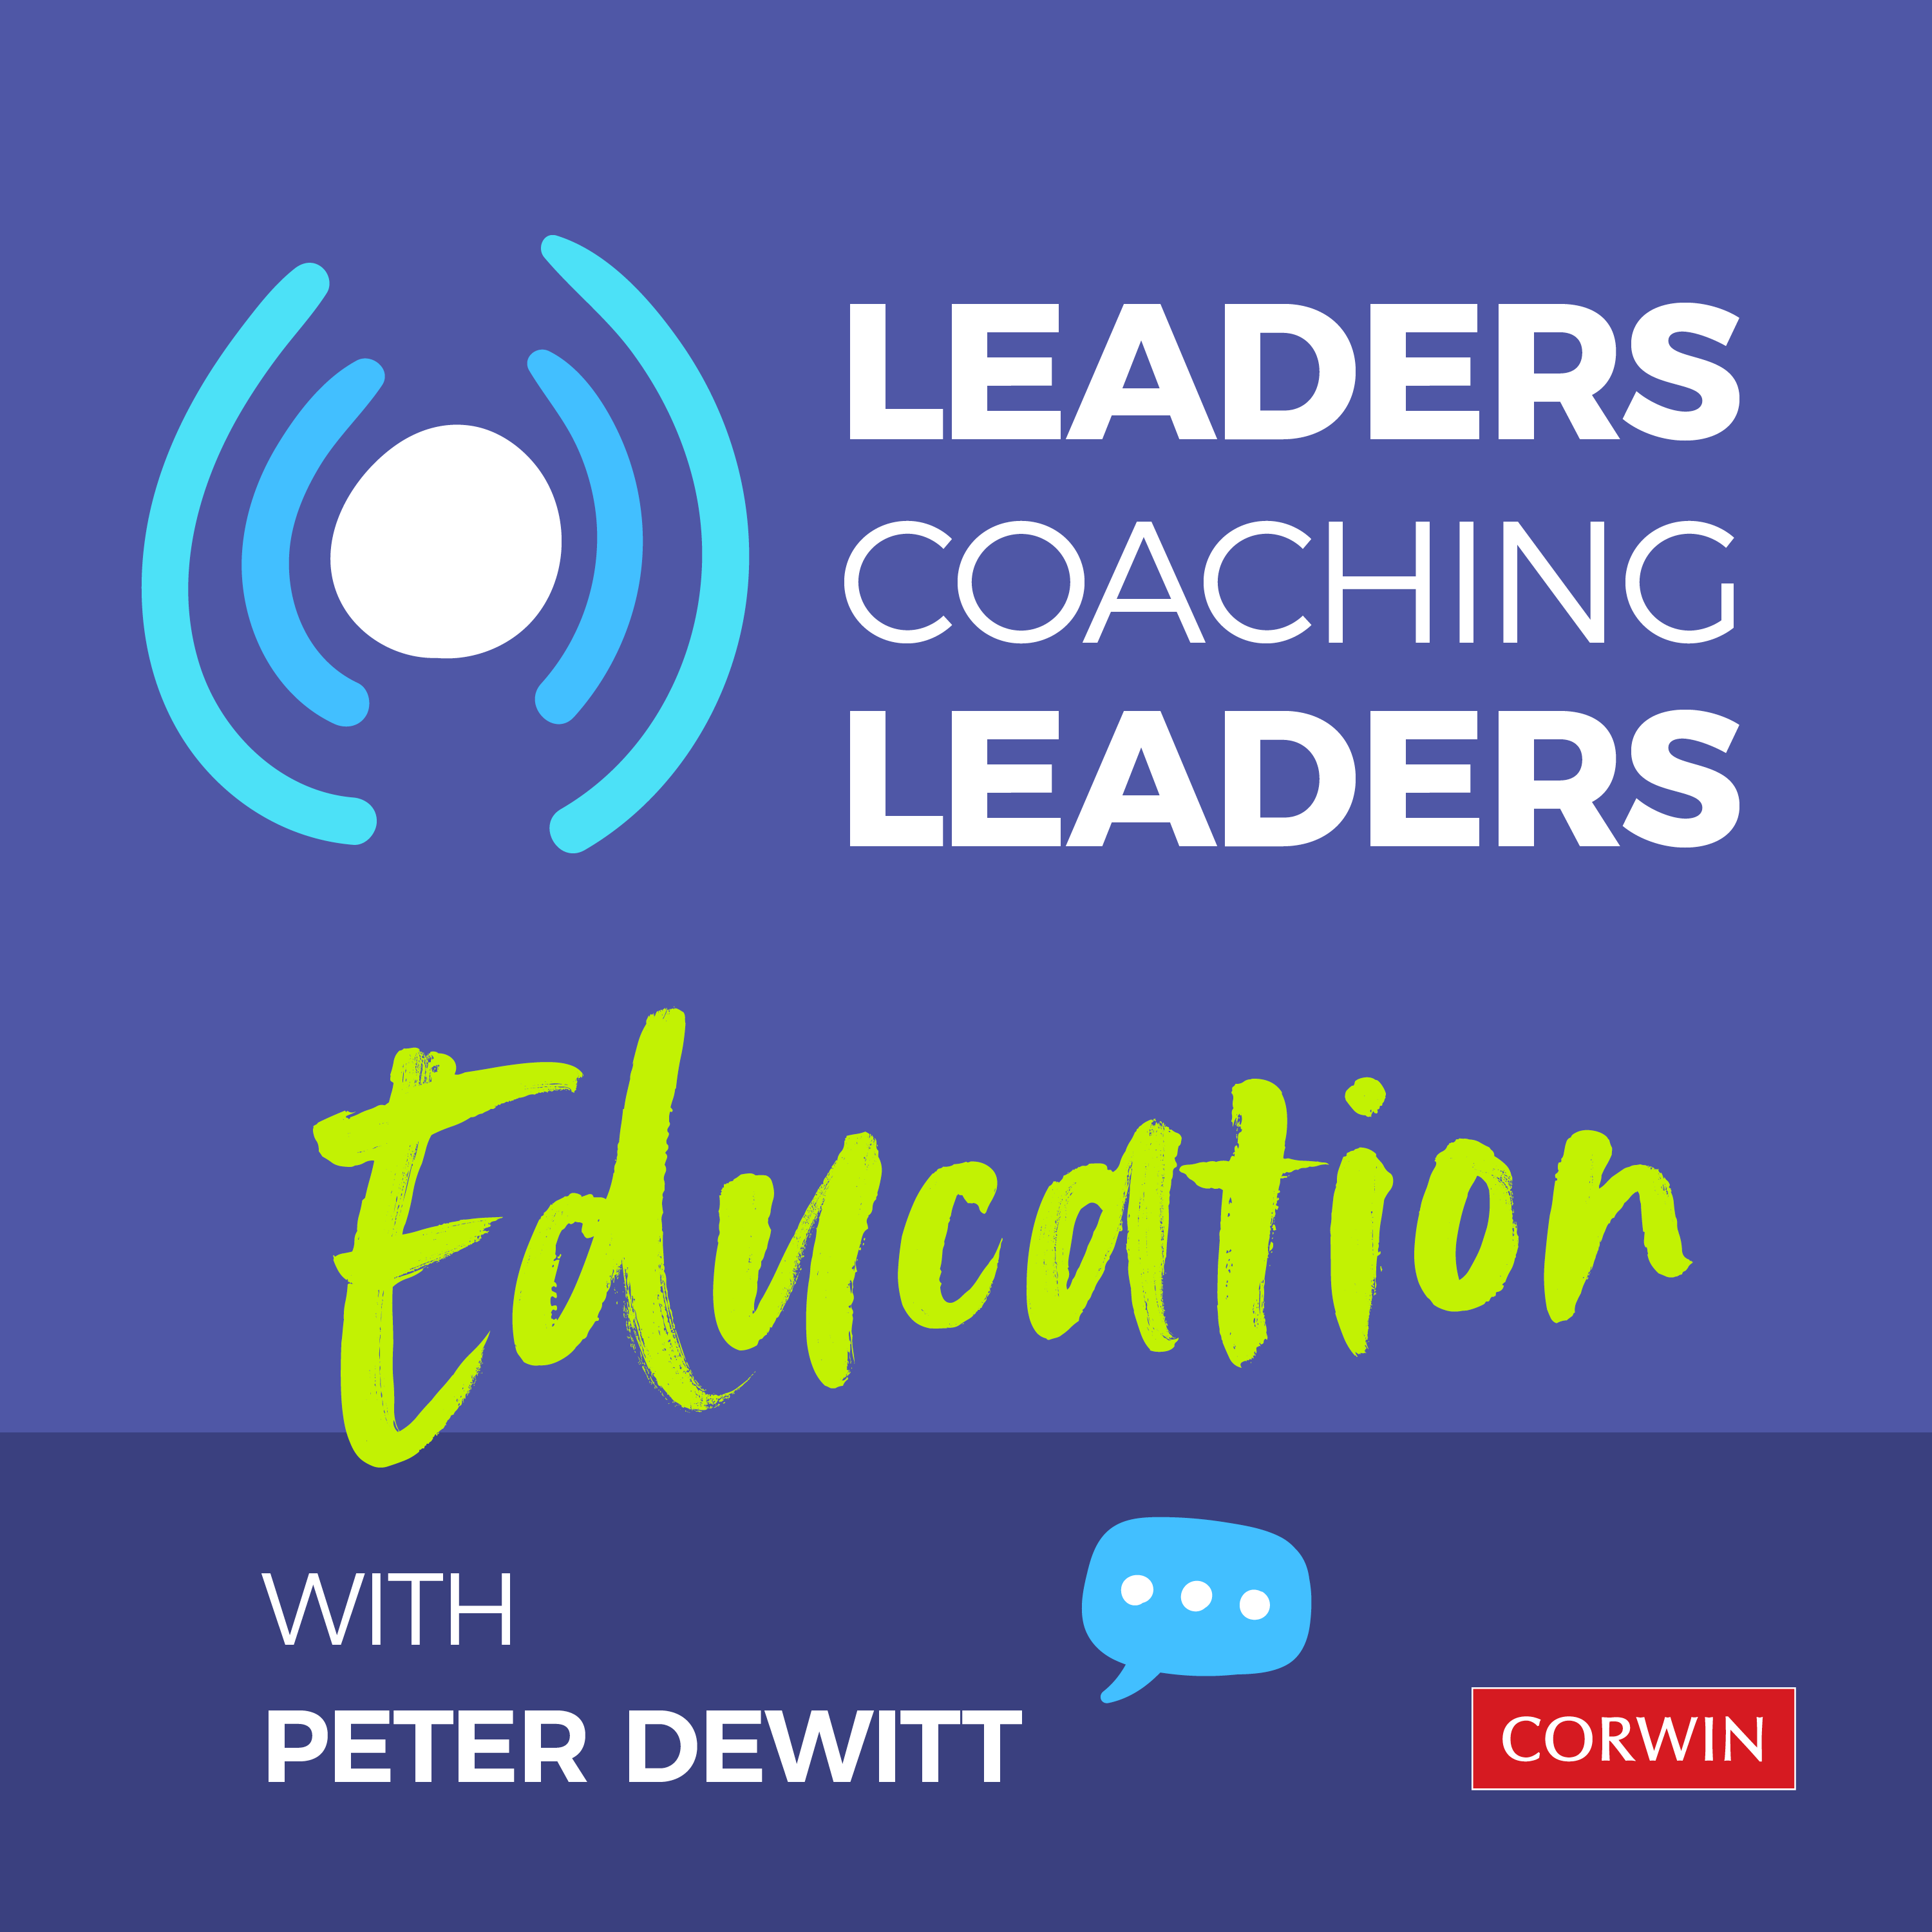 Leaders Coaching Leaders Podcast